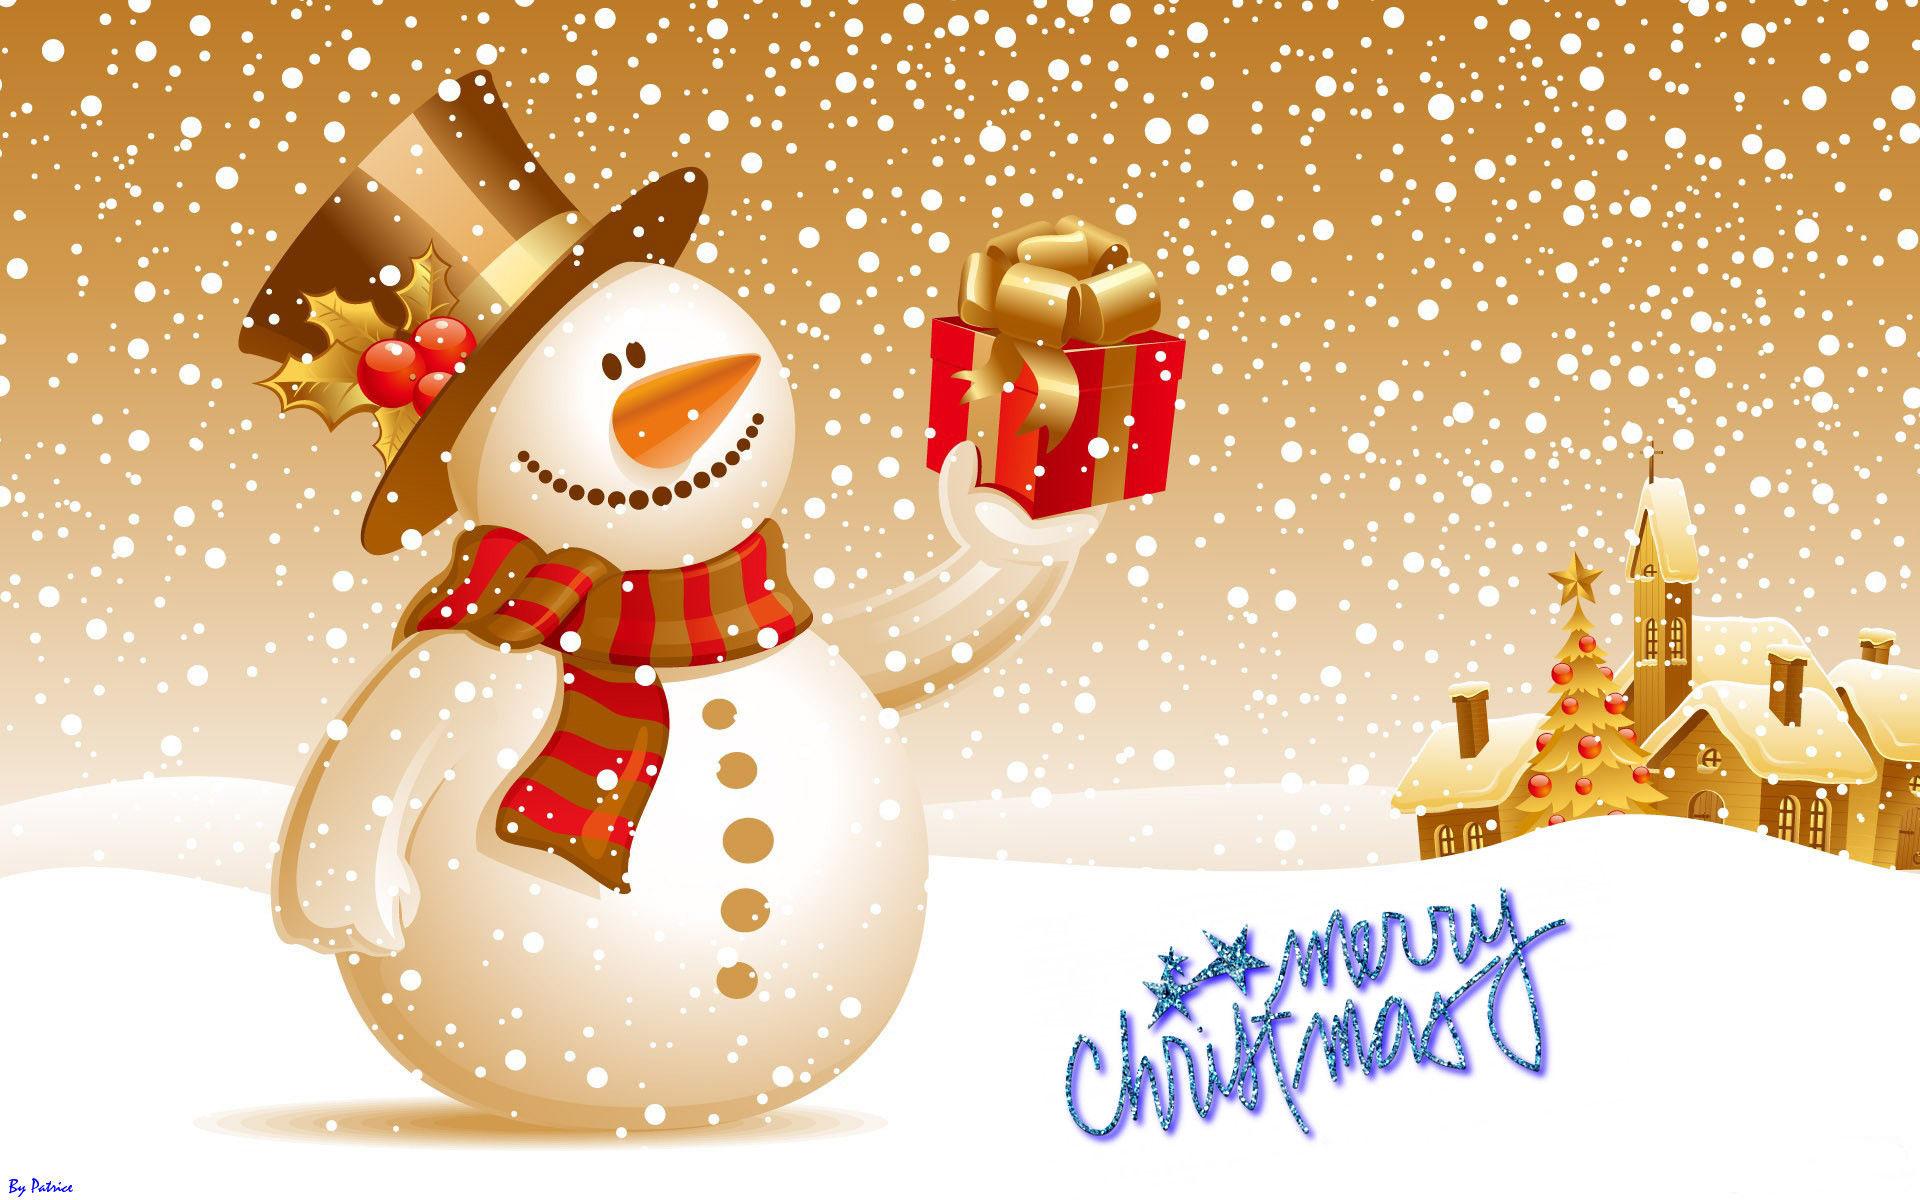 Merry Christmas Image For Sending To Everyone Picture